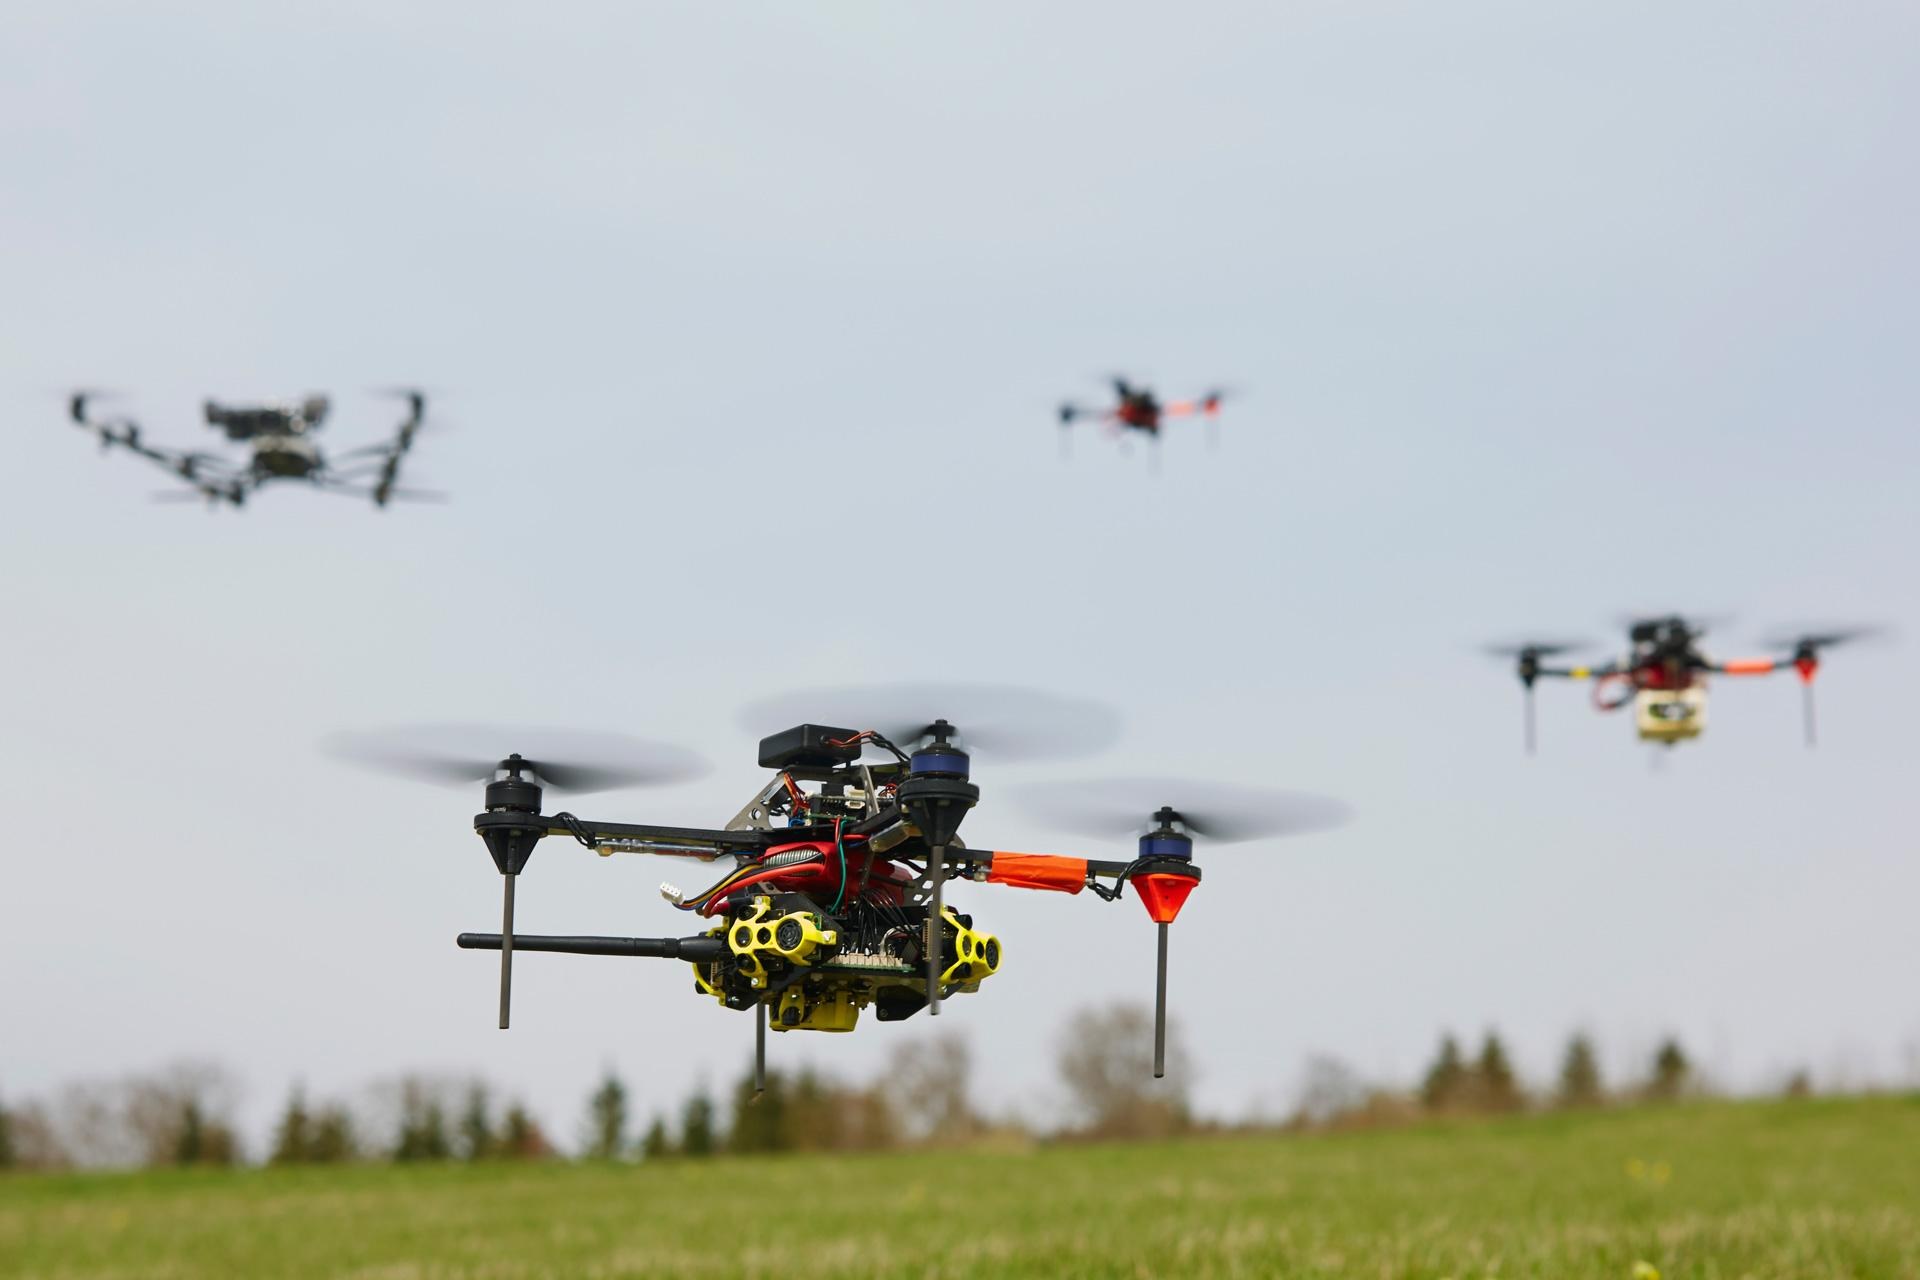 A quadrocopter is an aircraft that uses four vertically downward acting rotors and propellers arranged in a plane to generate lift and propulsion.